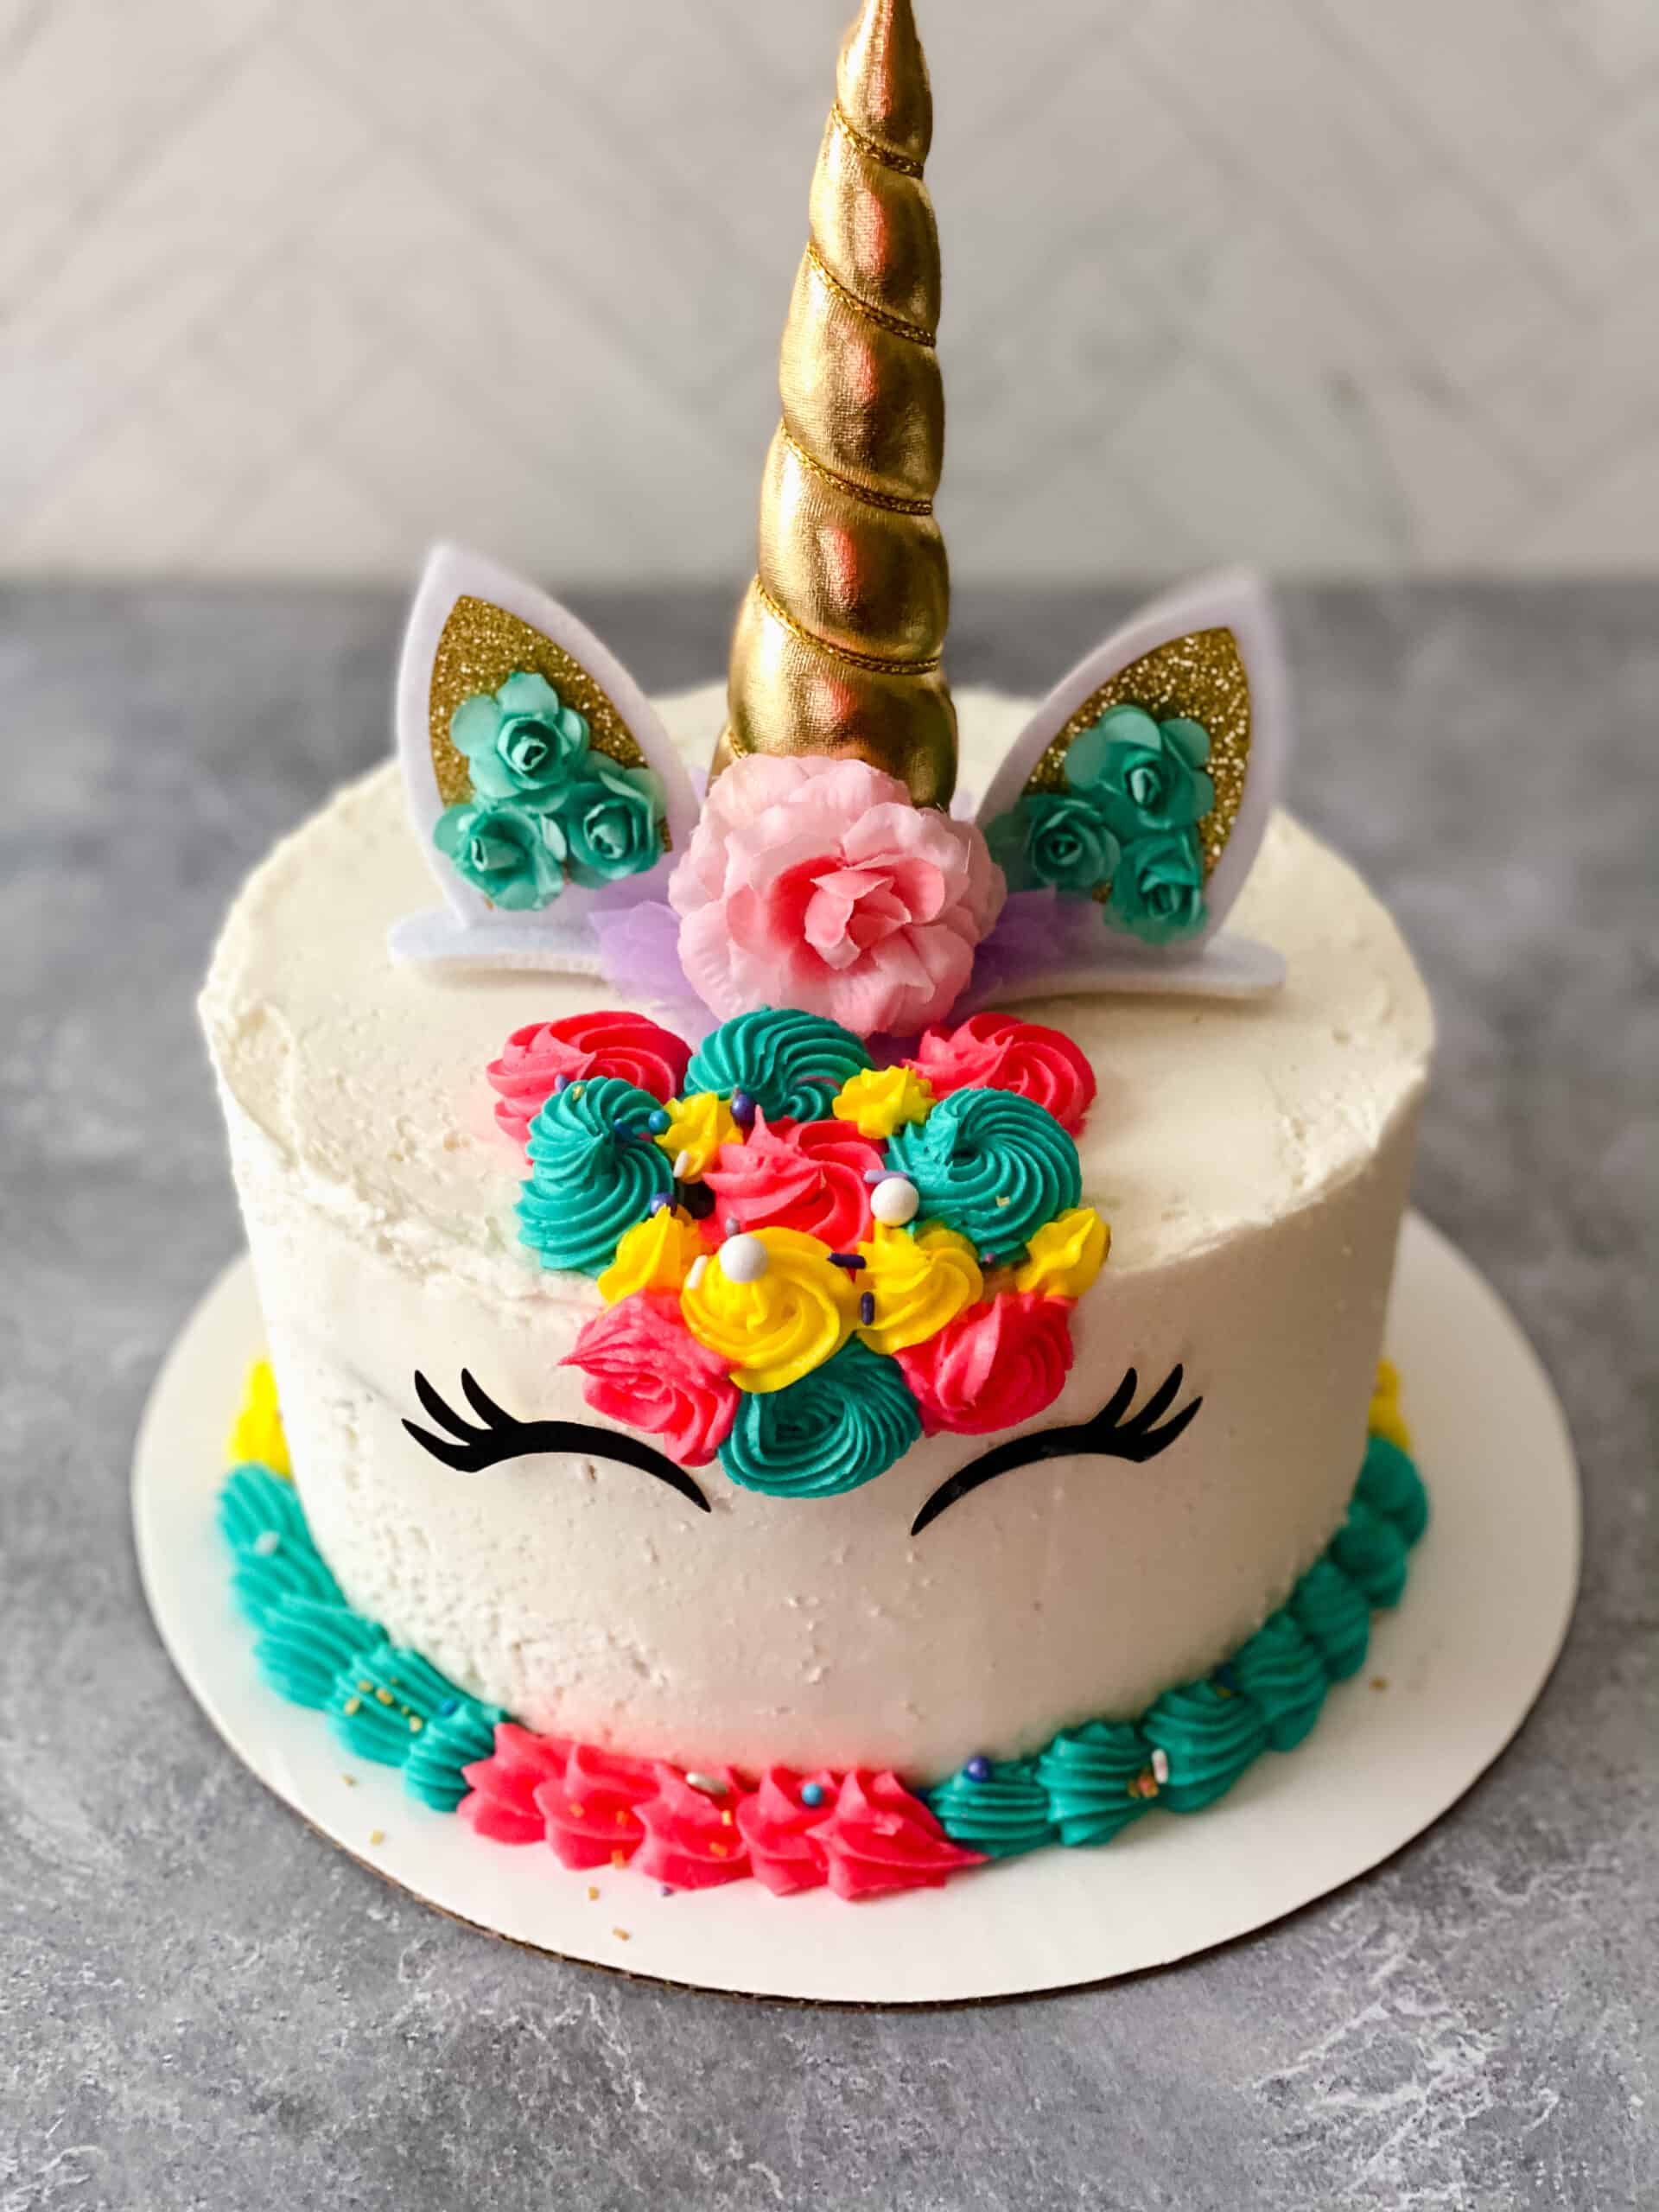 Rainbow Unicorn Cake Pictures Photos And Images For Facebook Tumblr ...